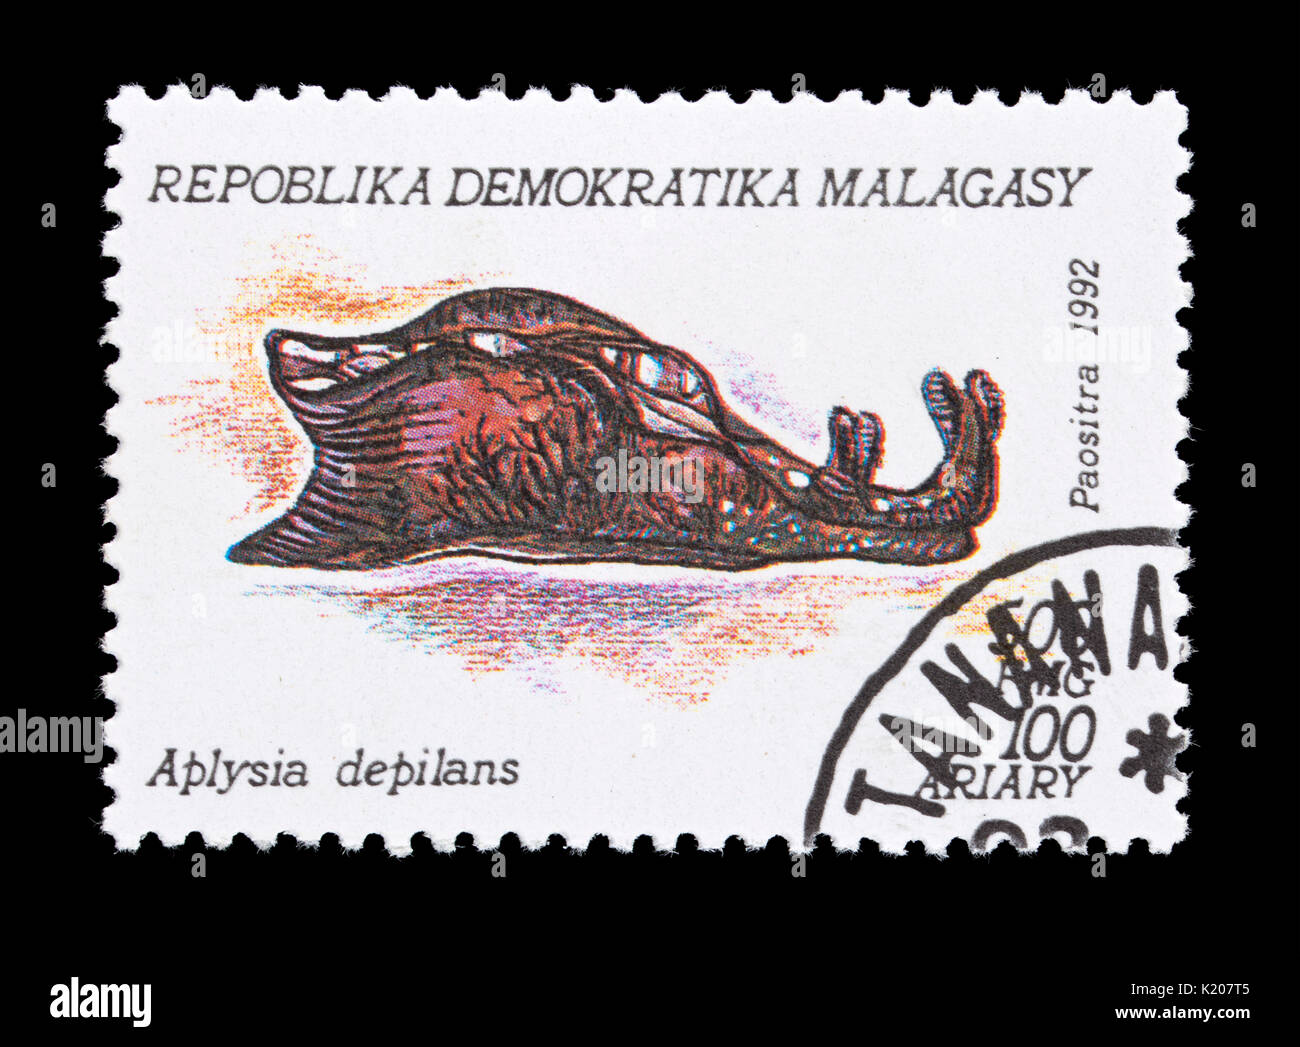 Postage stamp from Madagascar depicting depilatory sea hare (Aplysia depilans) Stock Photo